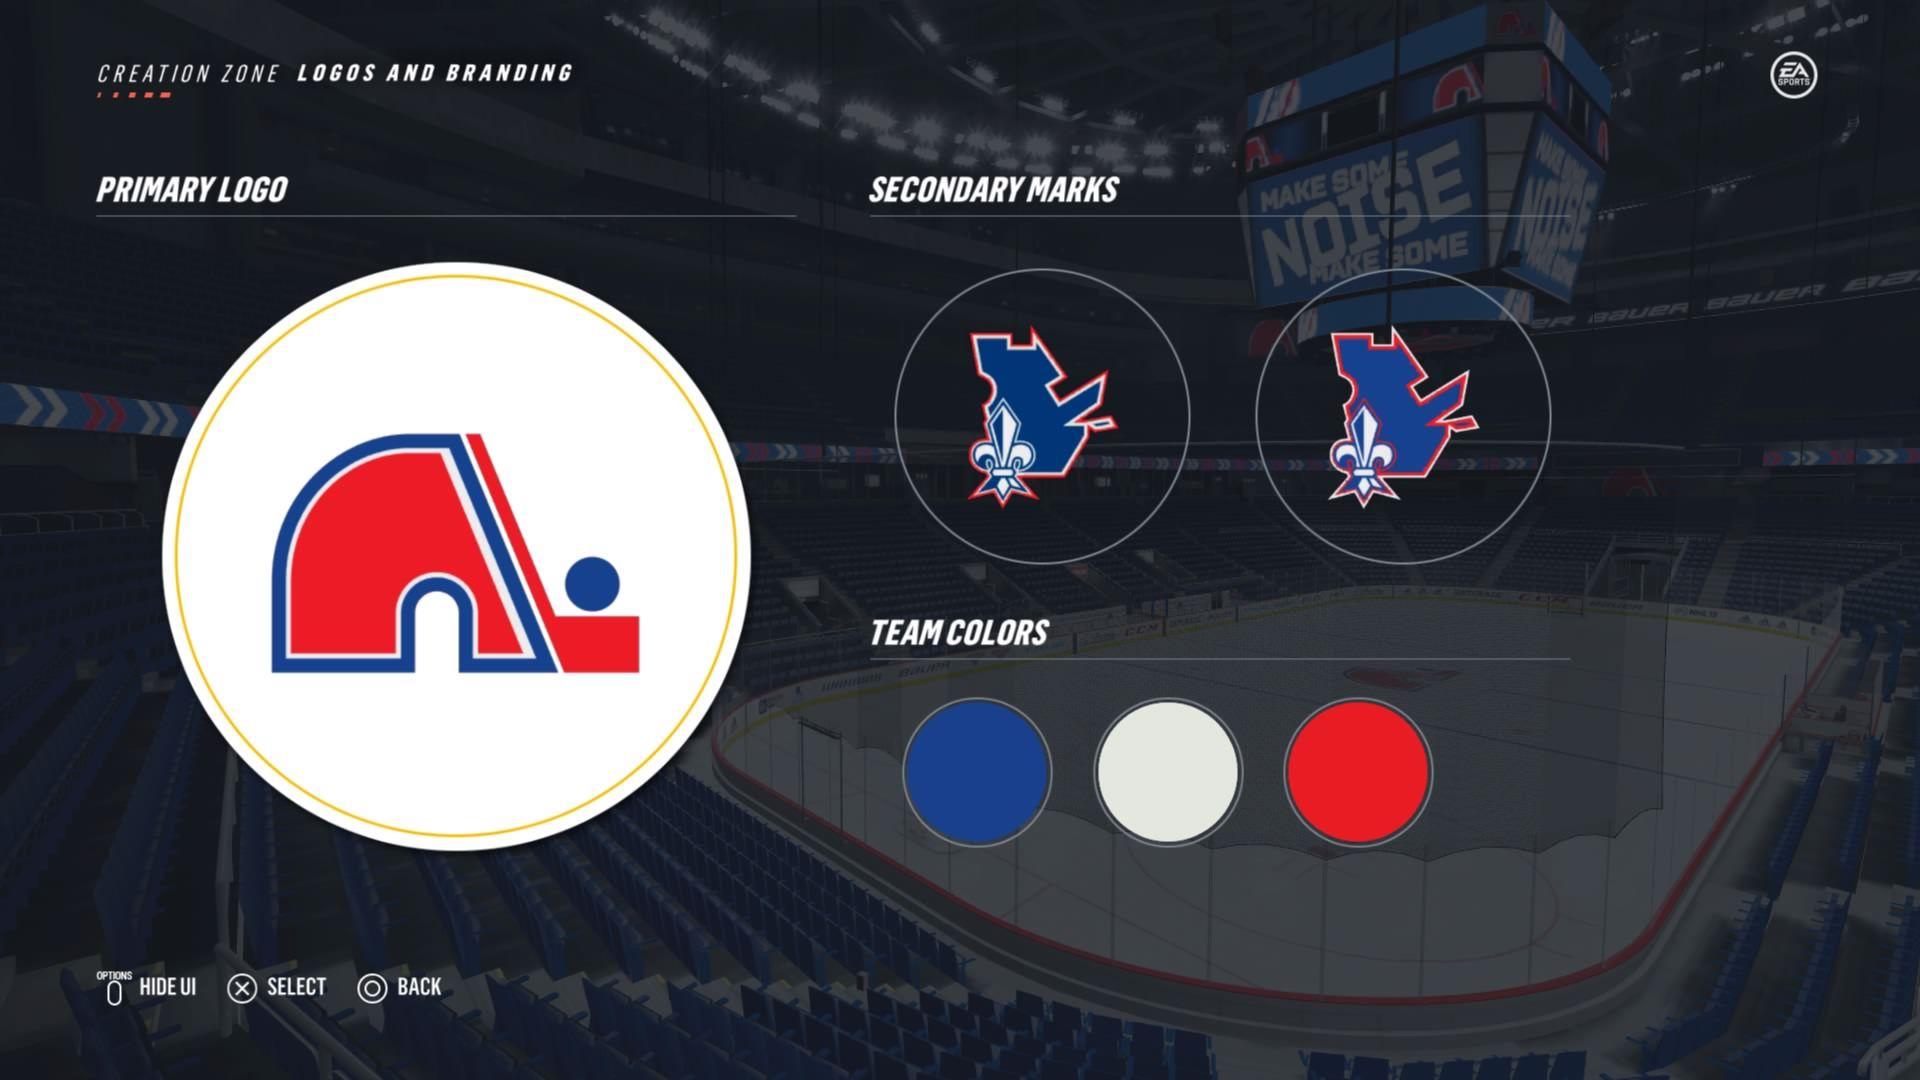 Nordiques Logo - My Template to create the Quebec Nordiques | HFBoards - NHL Message ...